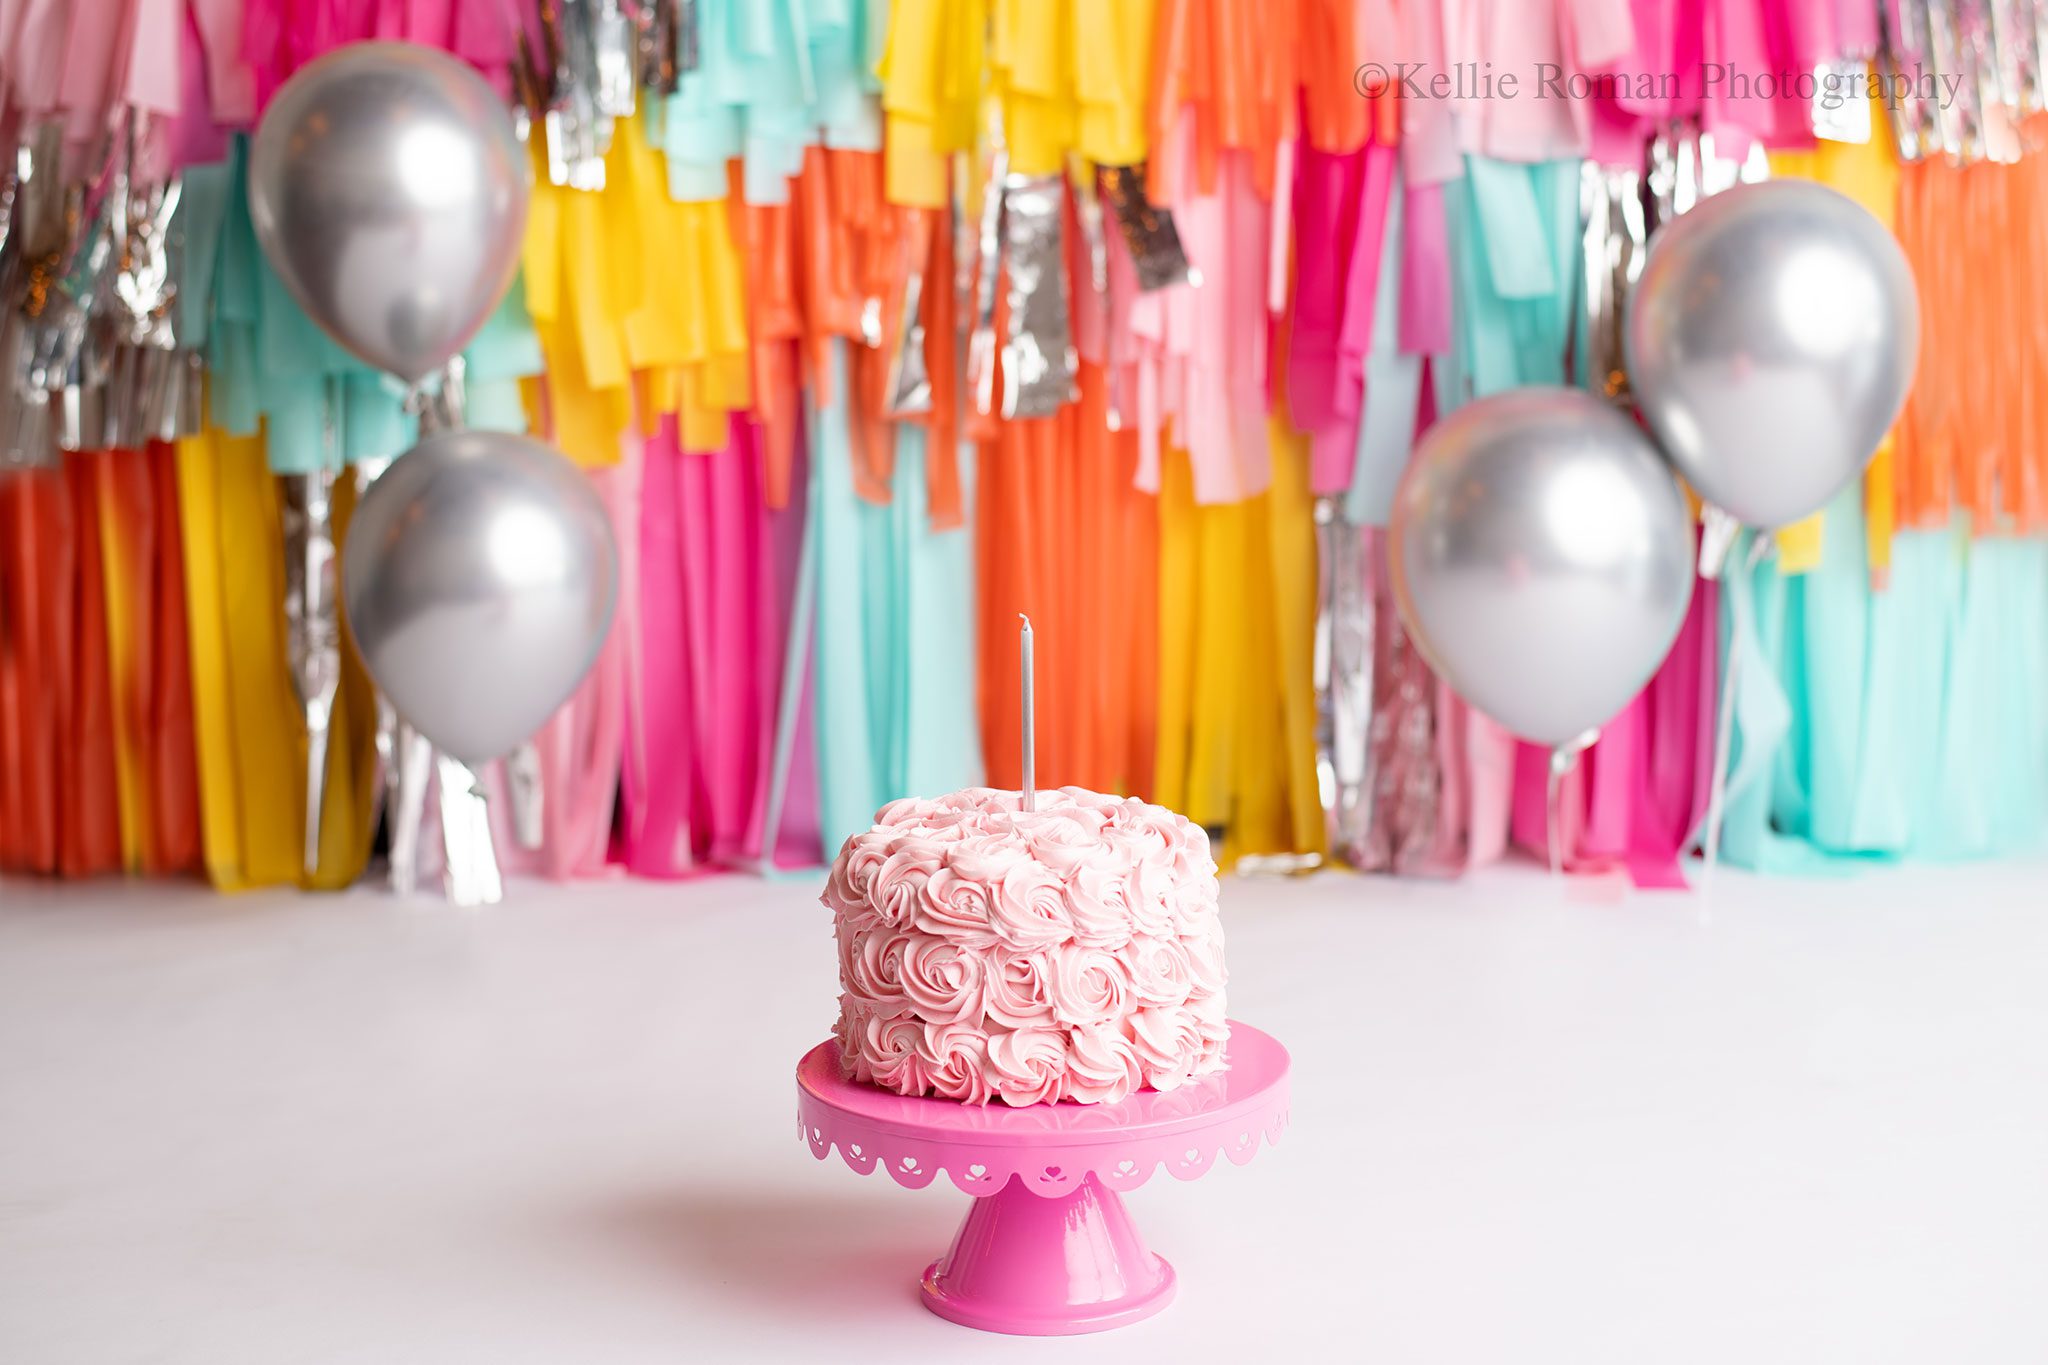 cake smash in milwaukee photo studio. light pink cake full of rosettes is resting on dark pink cake stand. the floor is white paper, and the backdrop has tons of bright colors. light pink, teal, yellow, orange and silver.
